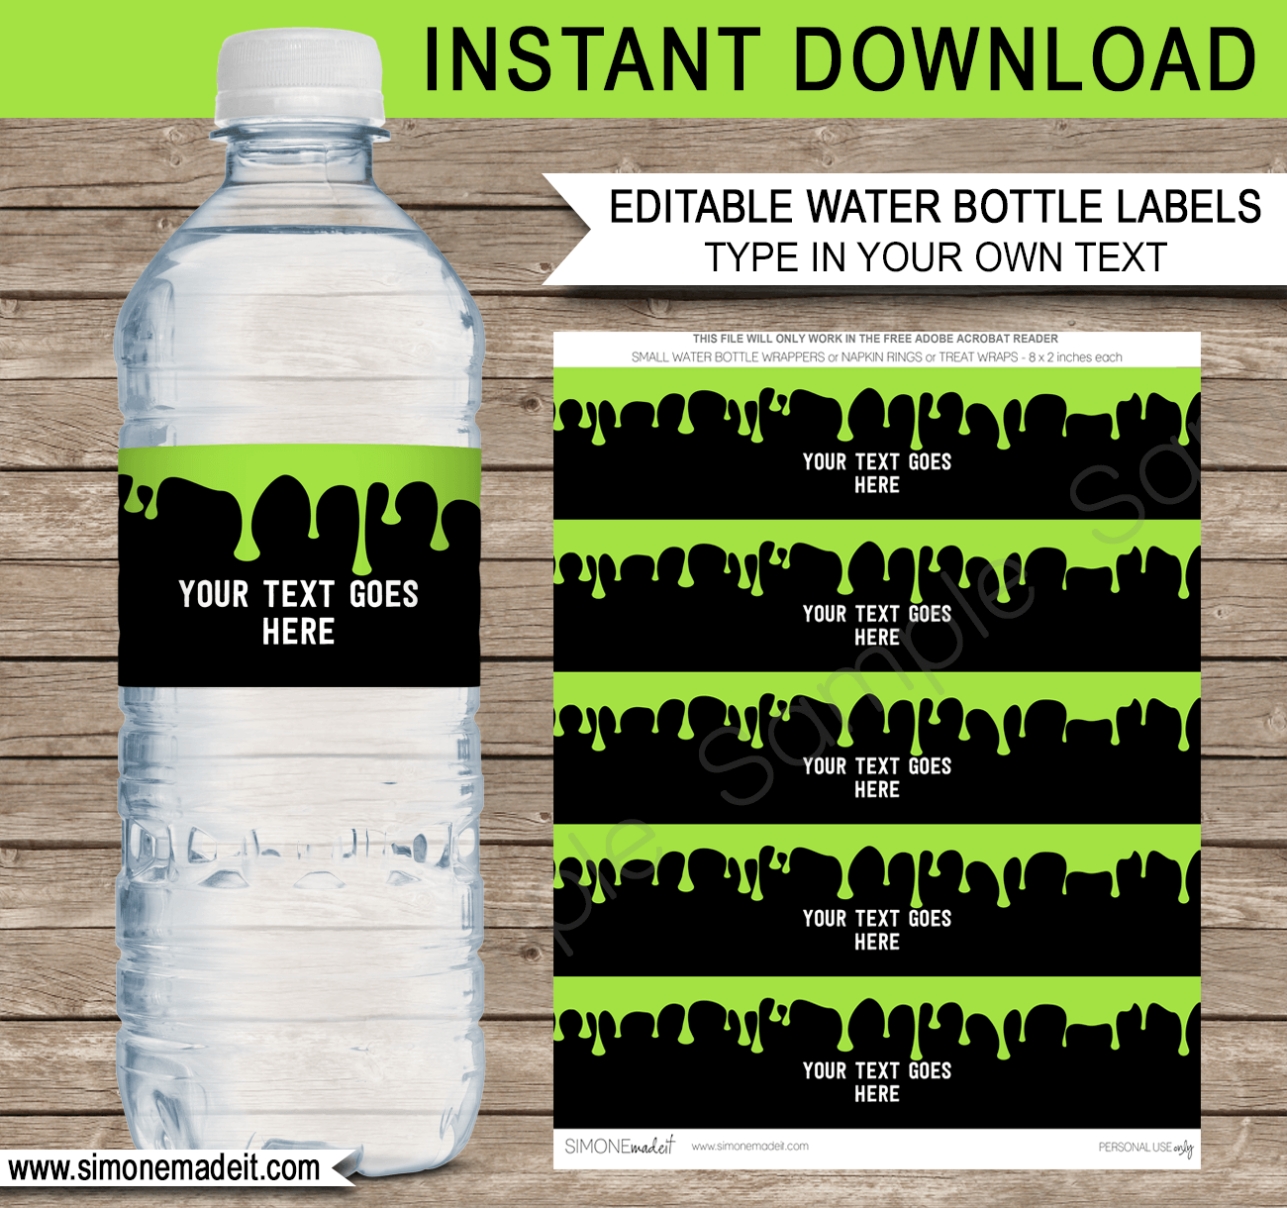 35 Free Printable Water Bottle Label Template – Label Design Ideas 2020 Intended For Free Printable Water Bottle Label Template